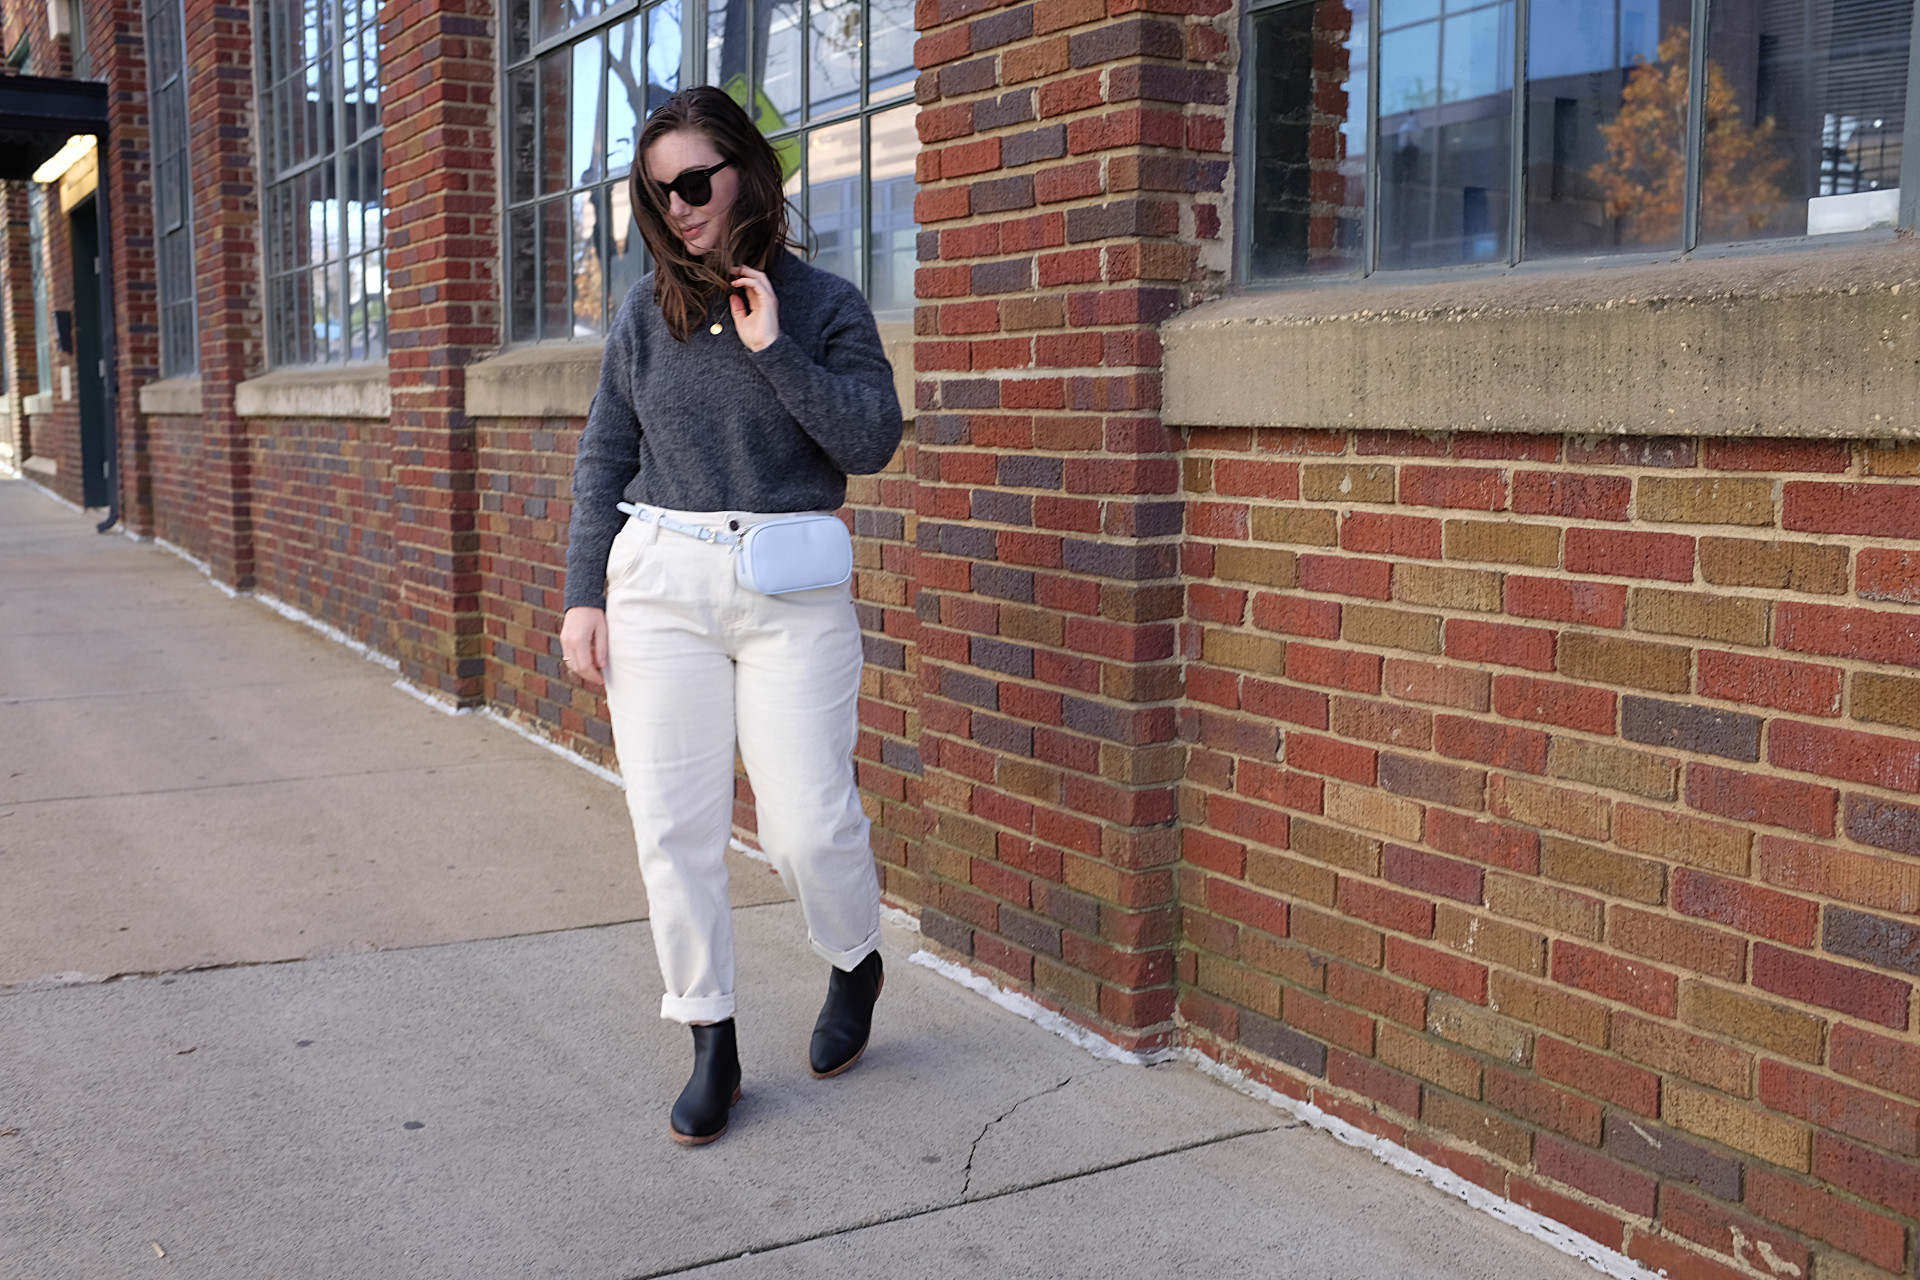 Alyssa is standing in front of a brick building. She is wearing a grey sweater with off-white pants, black sunglasses, a light blue belt bag, and black boots. She has her left hand in her hair and it is windy.